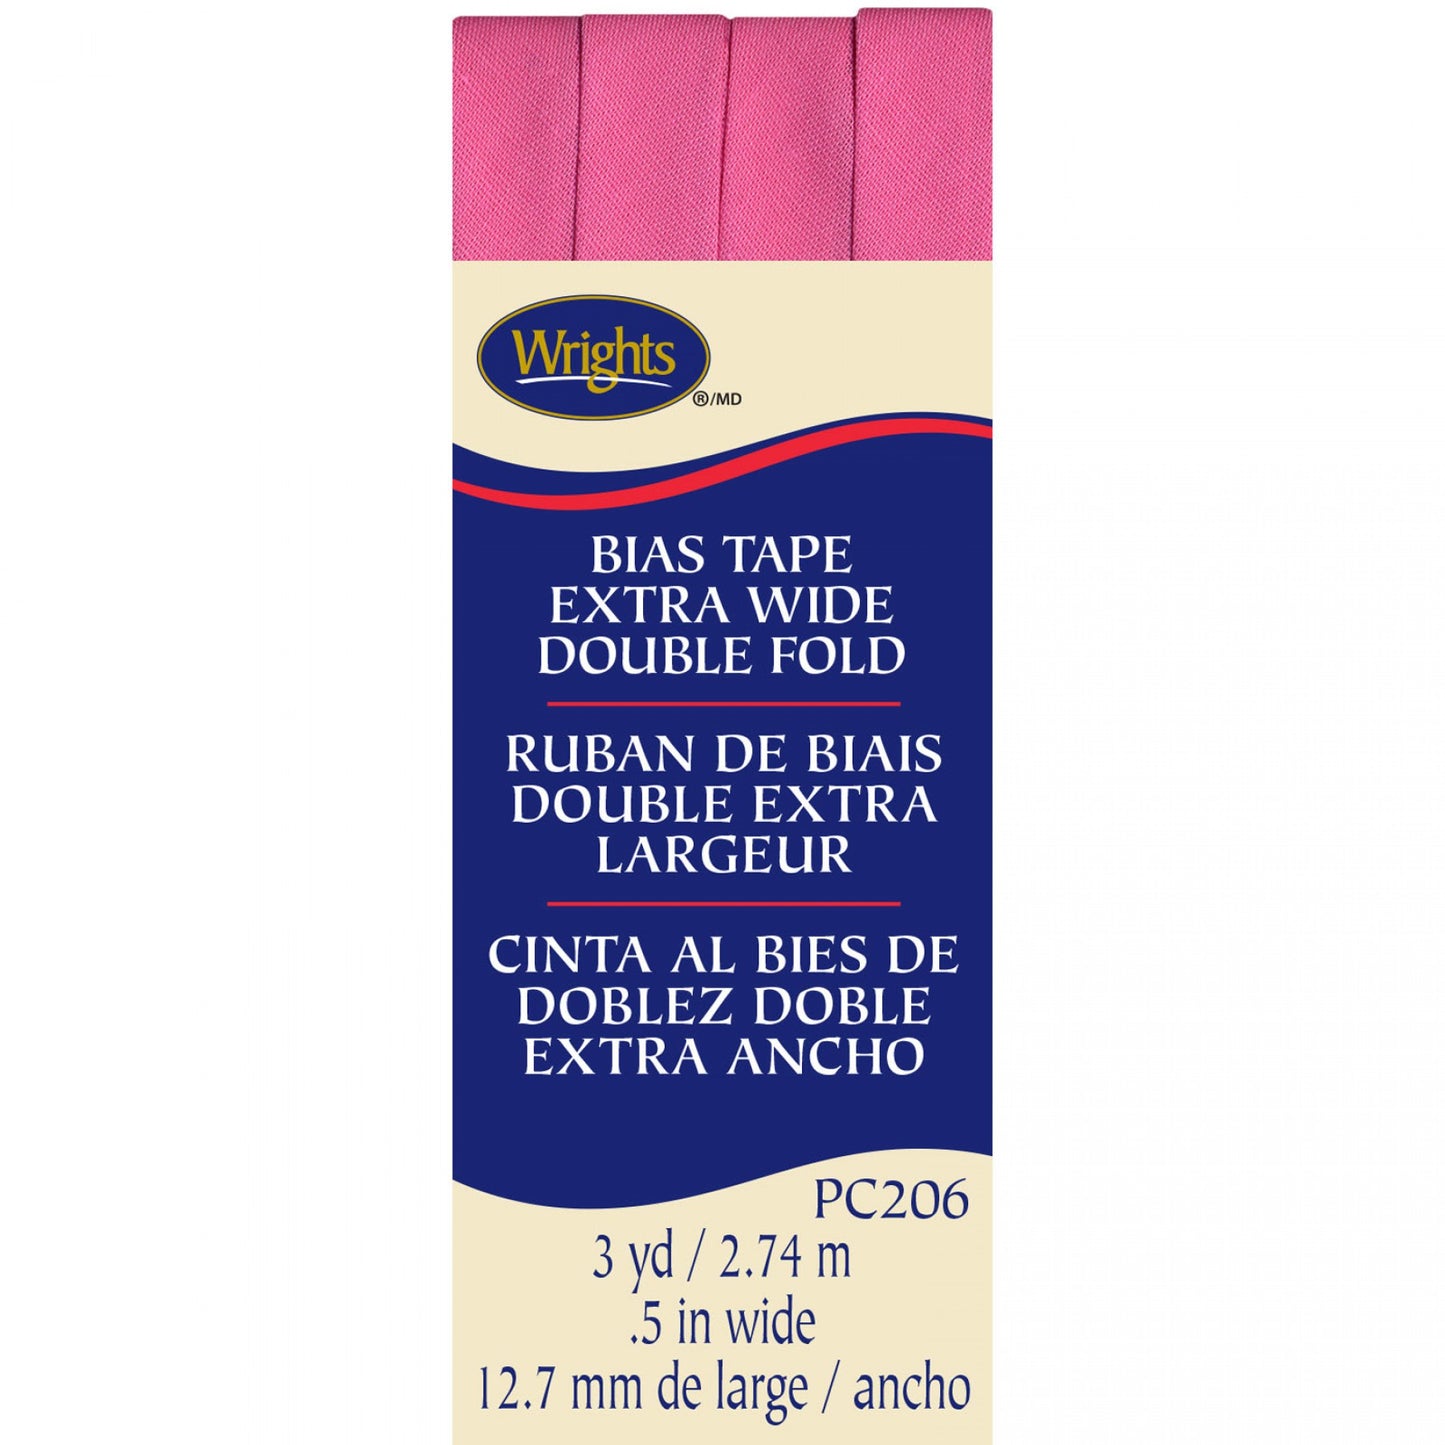 Wrights Extra Wide Double Fold Bias Tape 1/2" x 3 yds, 13mm, Berry Sorbet #216